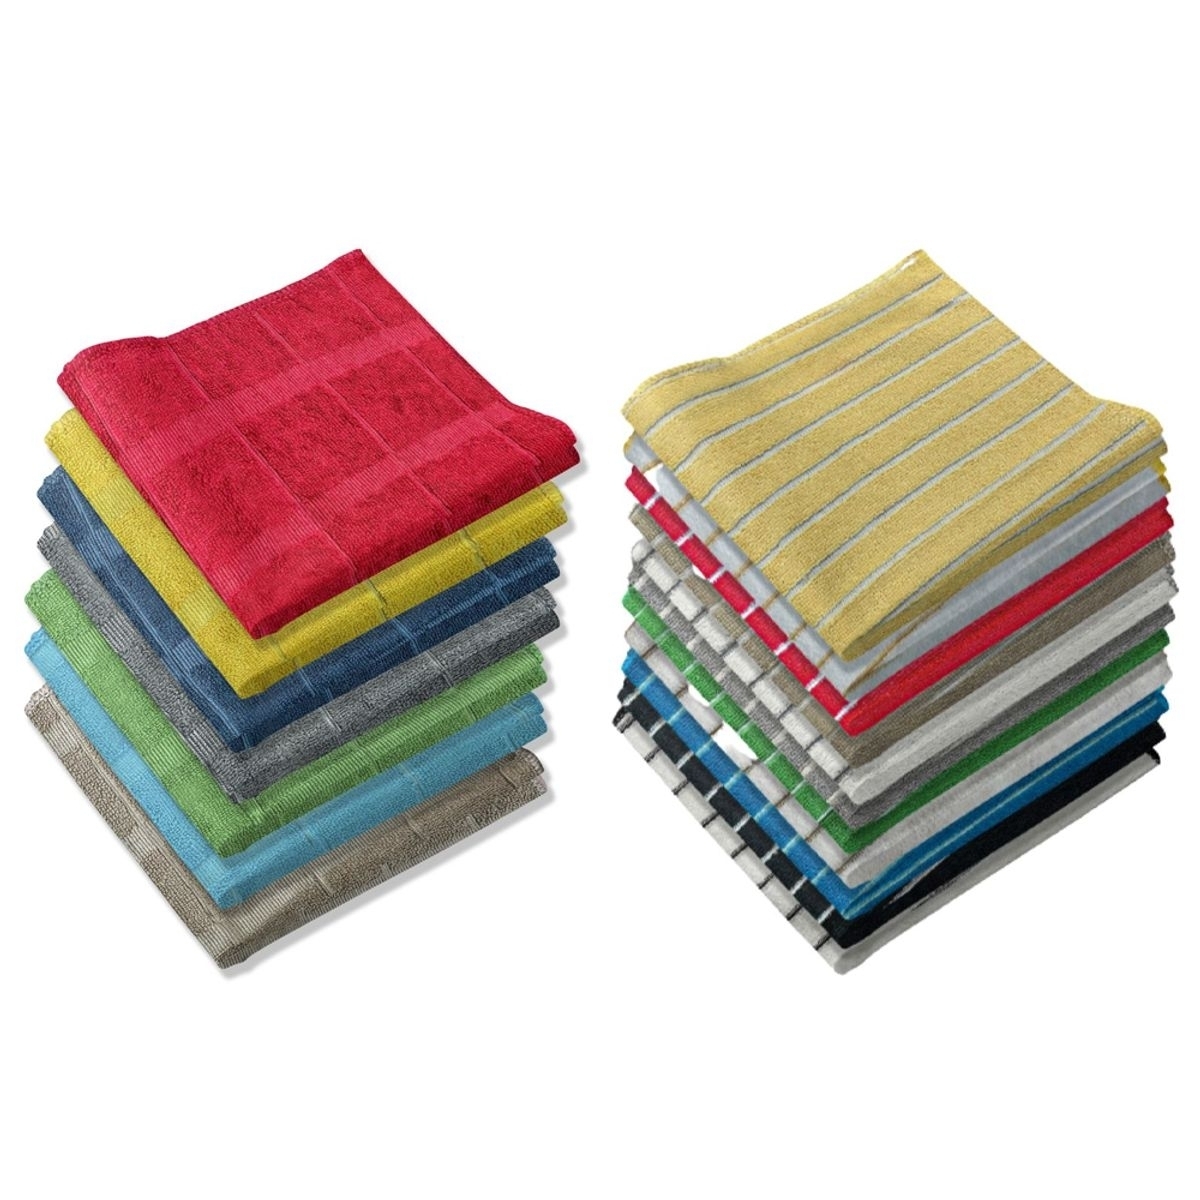 20-Pack: Ultra-Absorbent Multi Use Cleaning Super Soft Microfiber Dish Utility Rag Cloths - Waffle